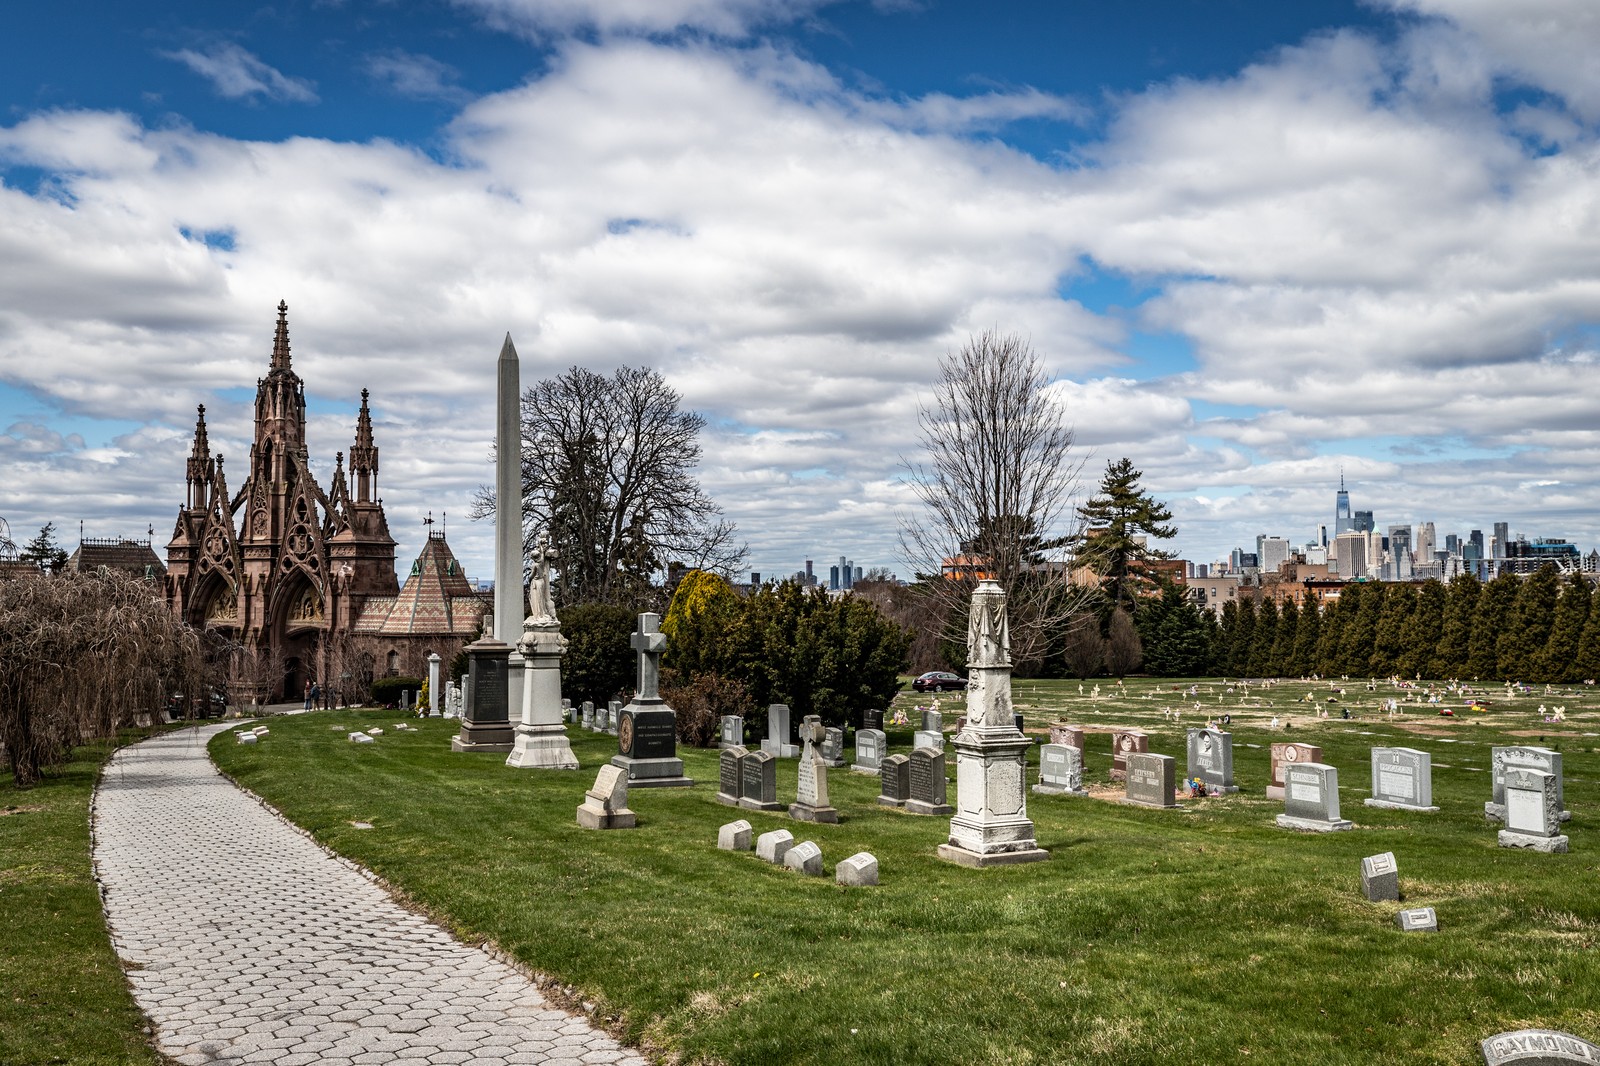 Green-wood cemetery, NYC